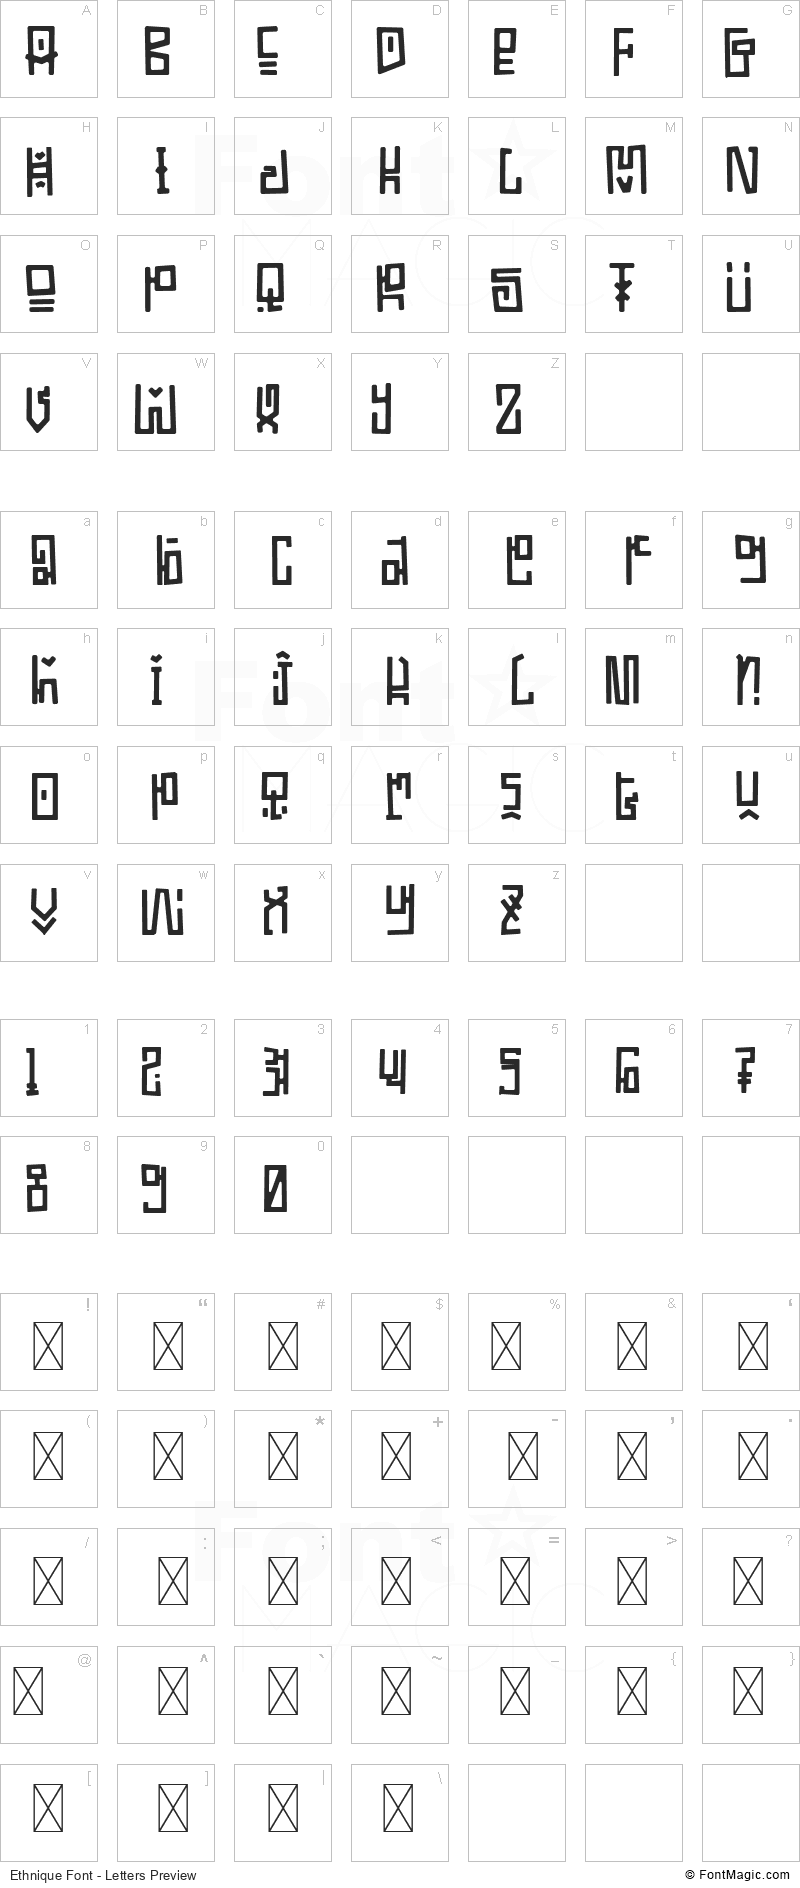 Ethnique Font - All Latters Preview Chart